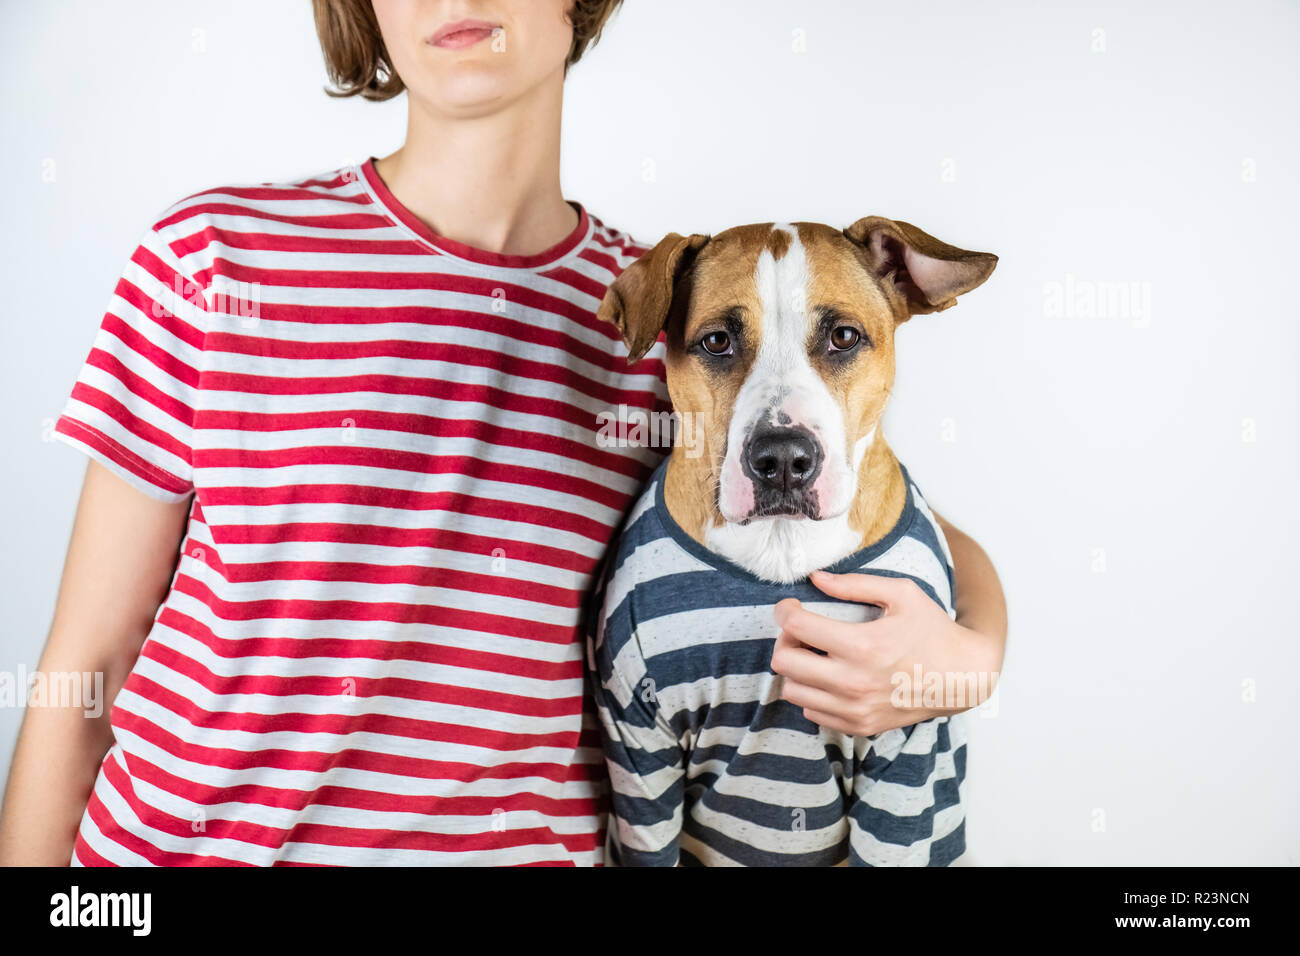 Dog and owner in similar clothes. Staffordshire terrier and human dressed in same t-shirts in studio background Stock Photo